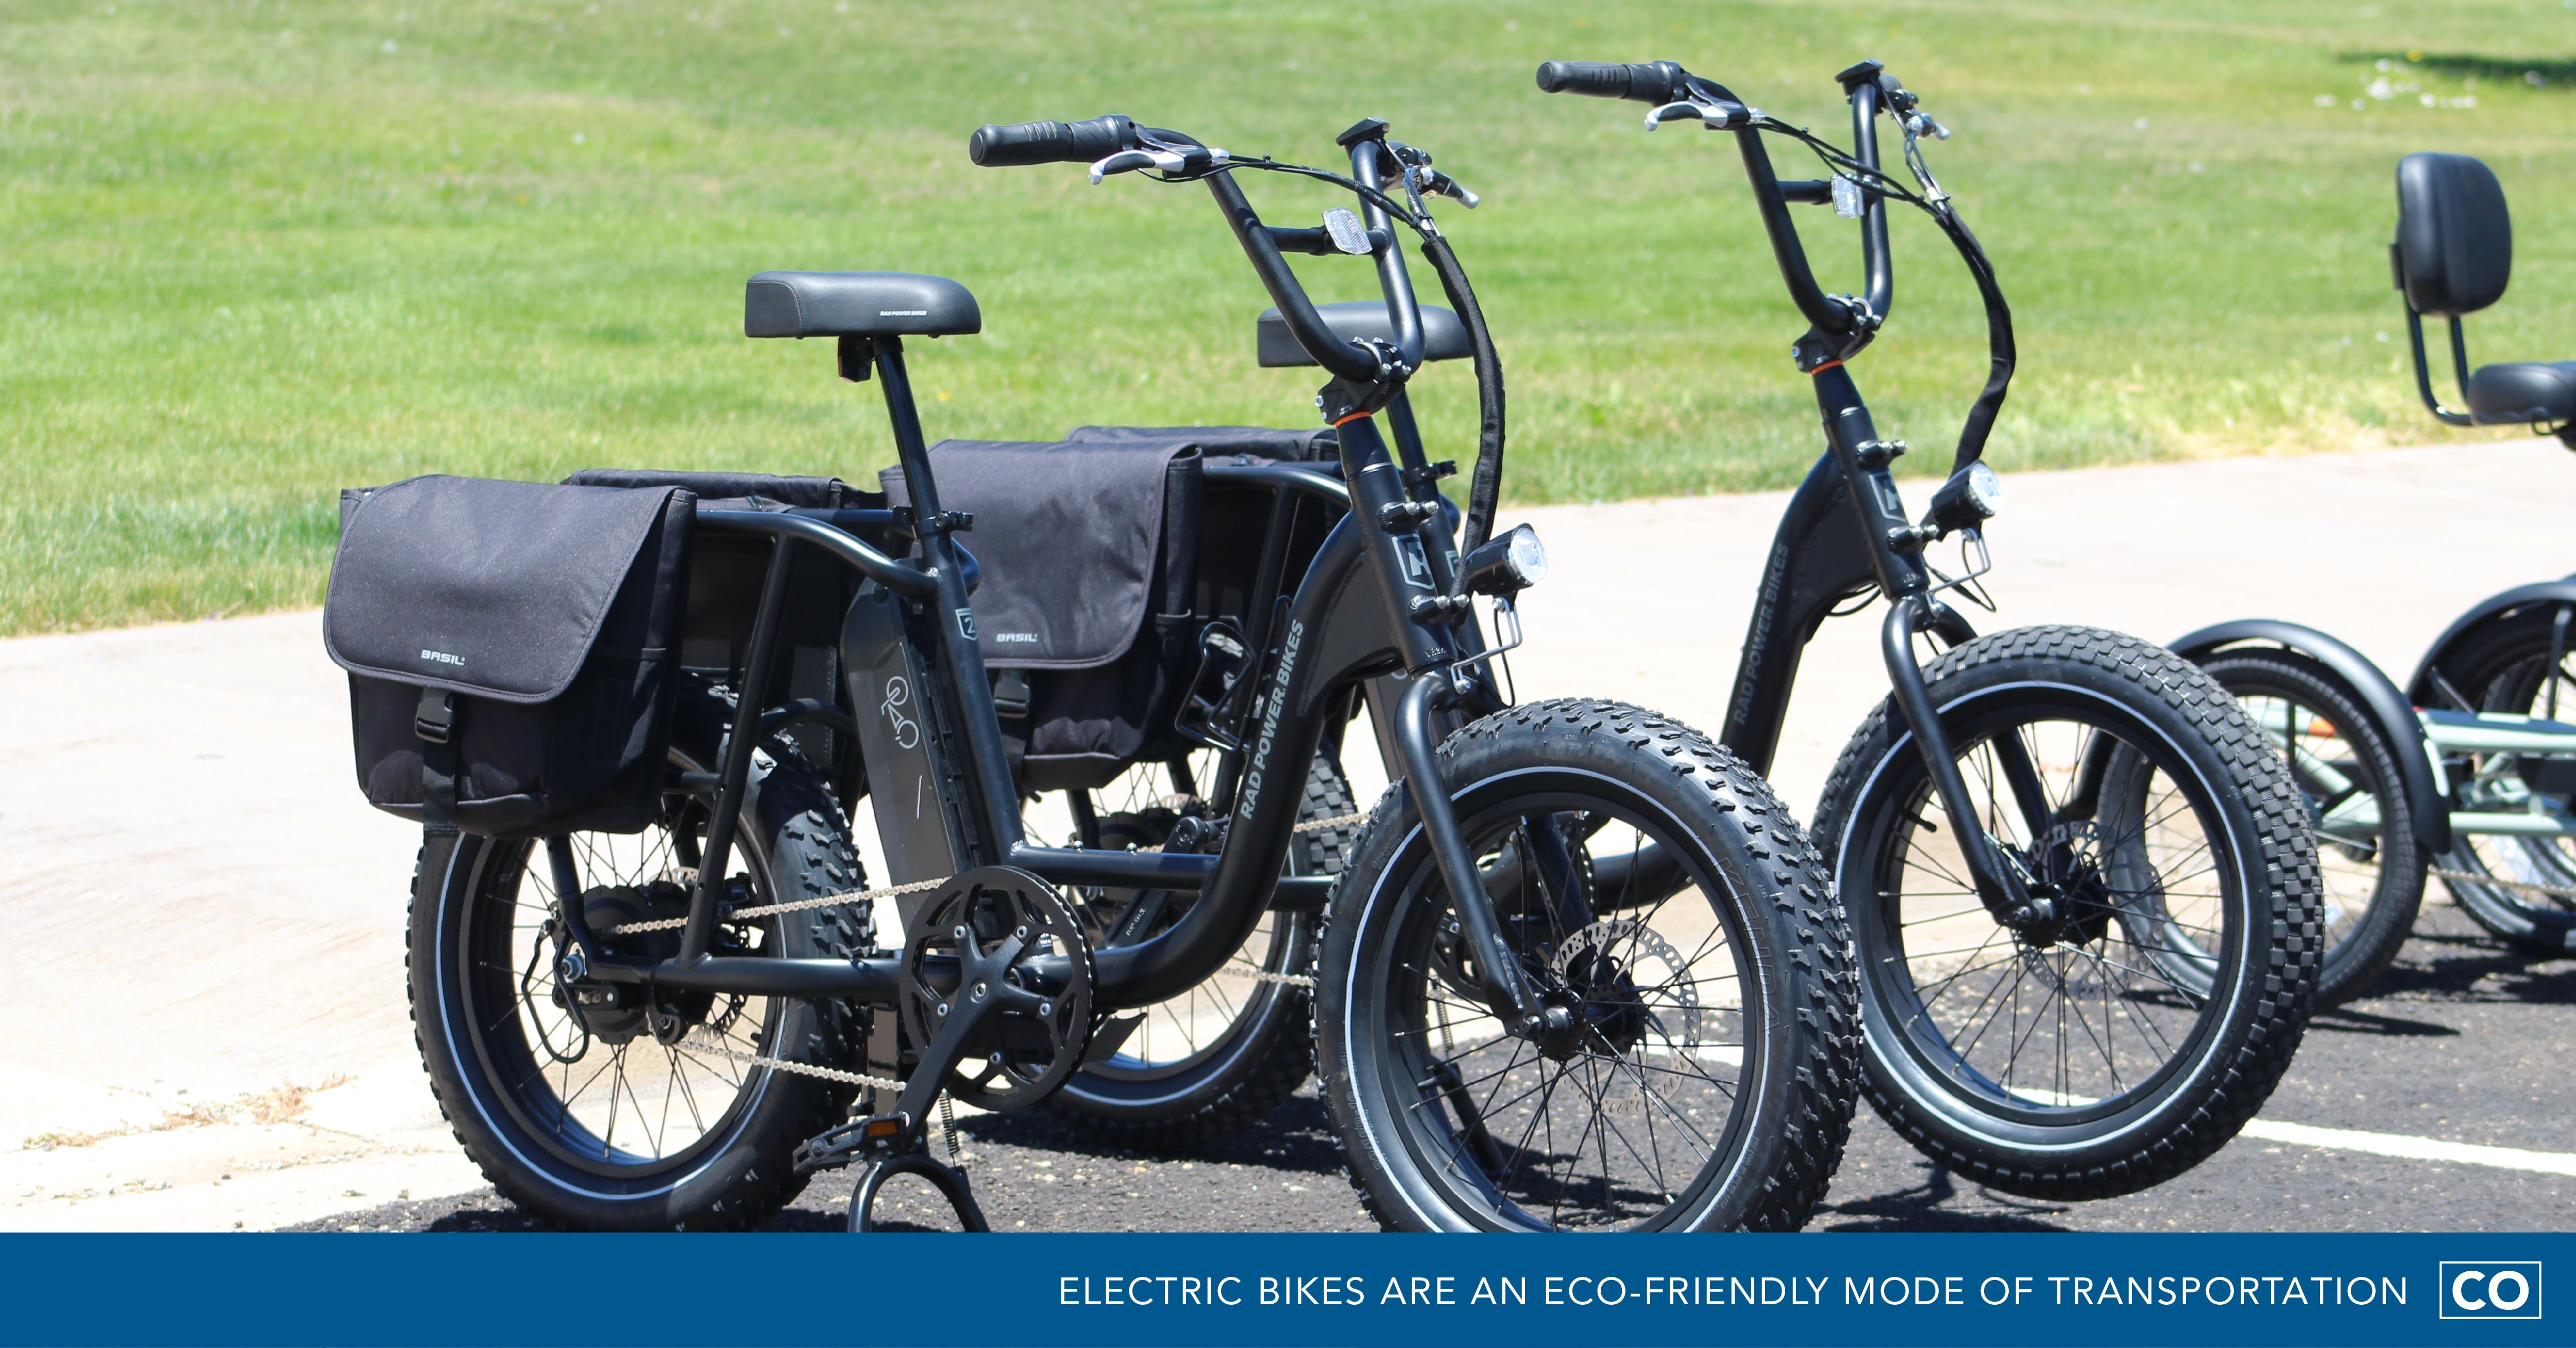 In addition to being eco-friendly, e-bikes are a fantastic option for older adults seeking enhanced mobility